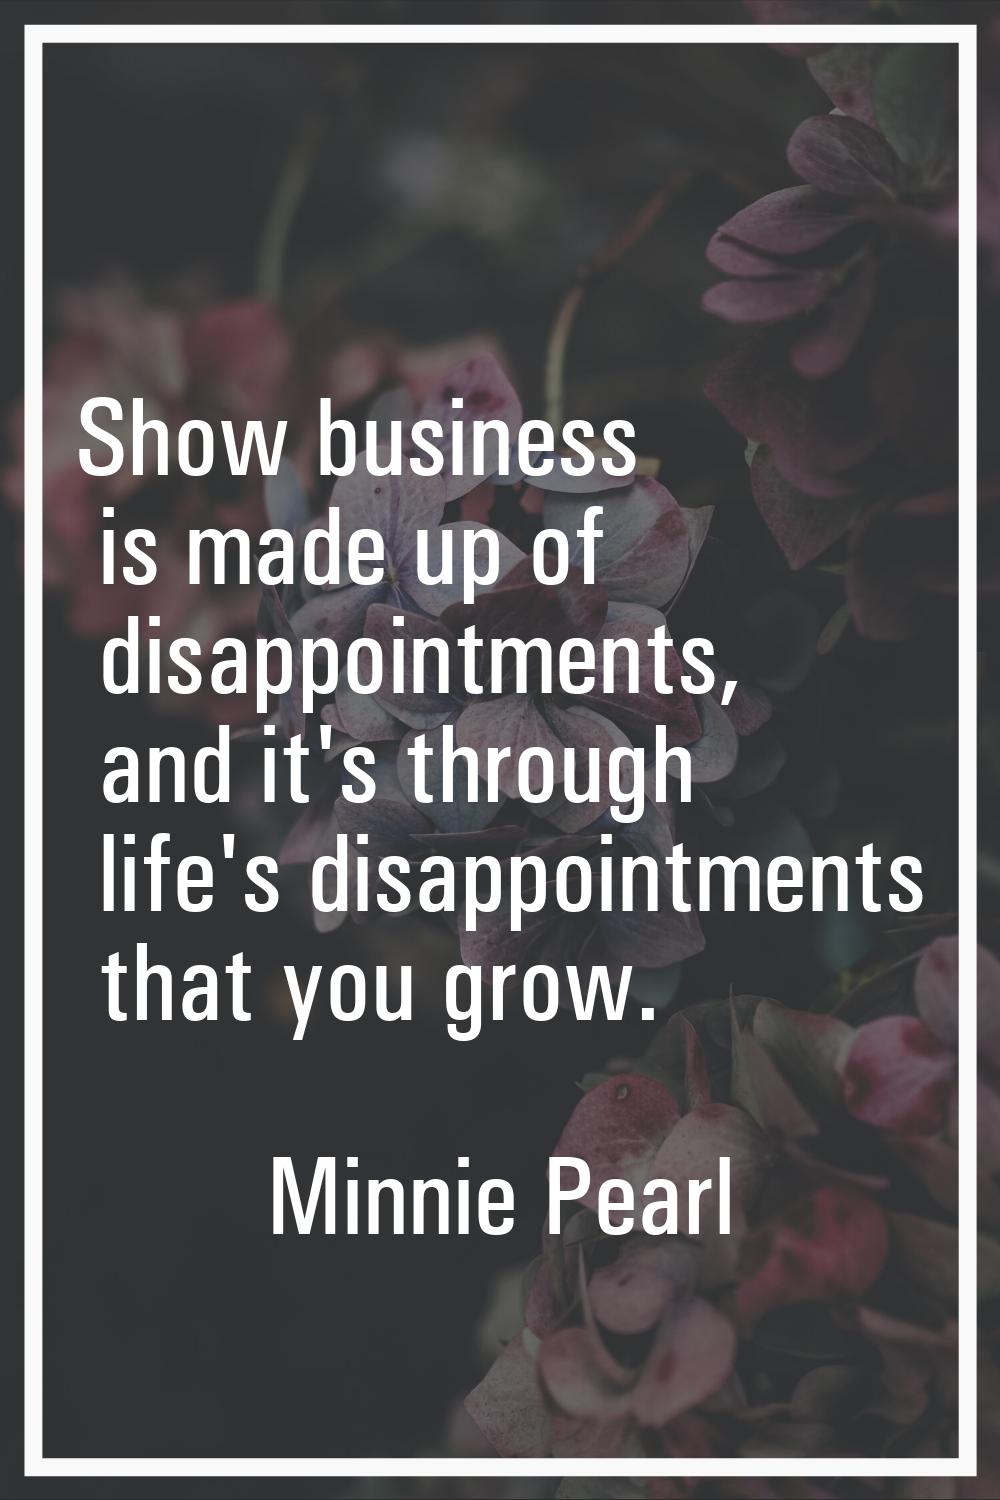 Show business is made up of disappointments, and it's through life's disappointments that you grow.